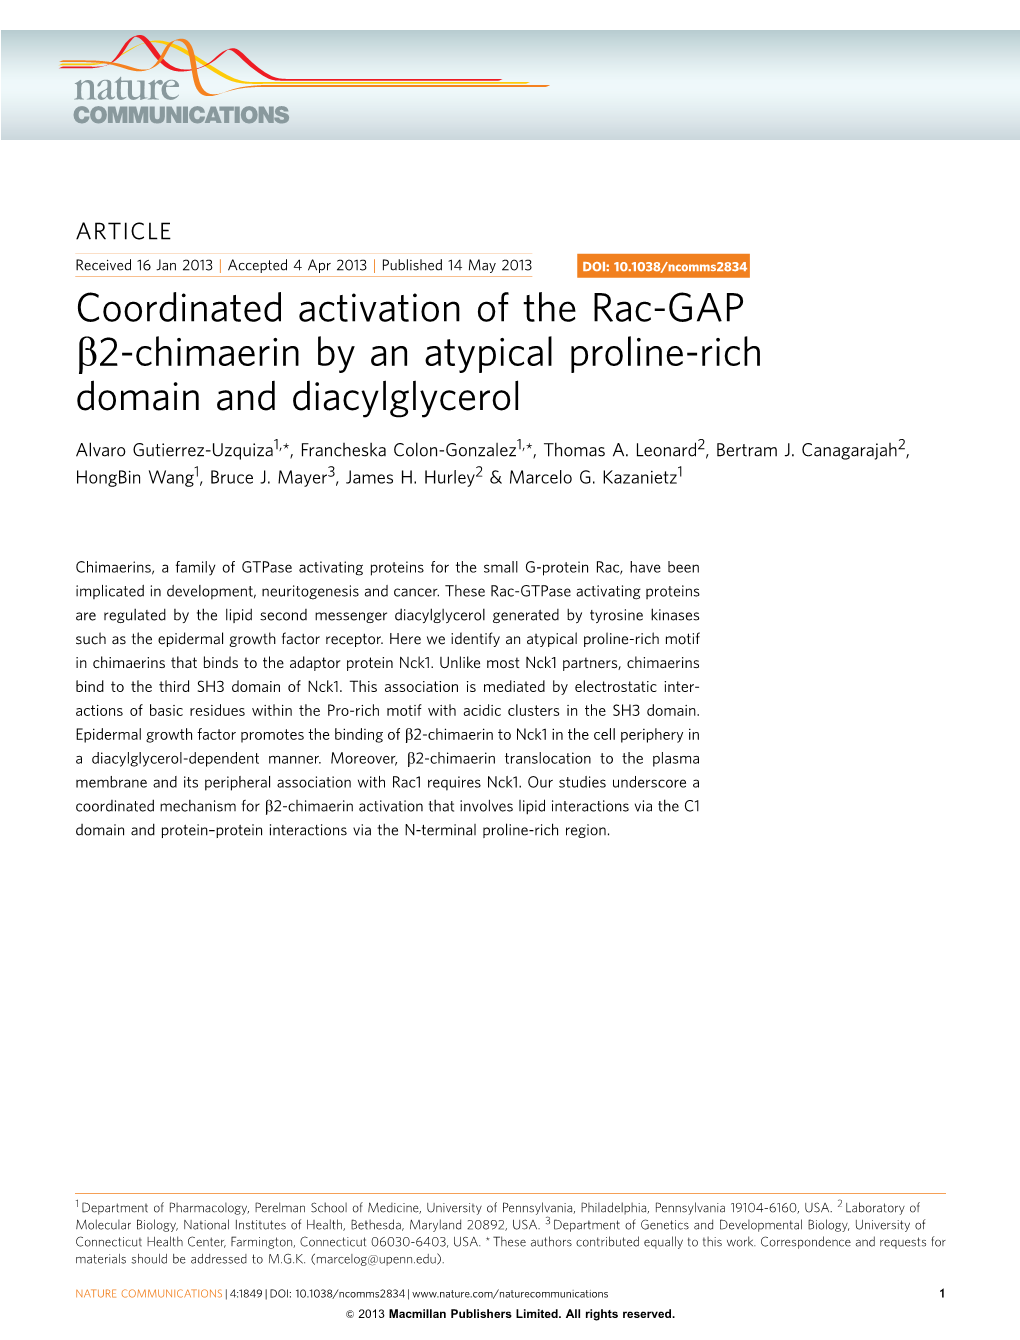 Coordinated Activation of the Rac-GAP &Beta;2-Chimaerin by an Atypical Proline-Rich Domain and Diacylglycerol